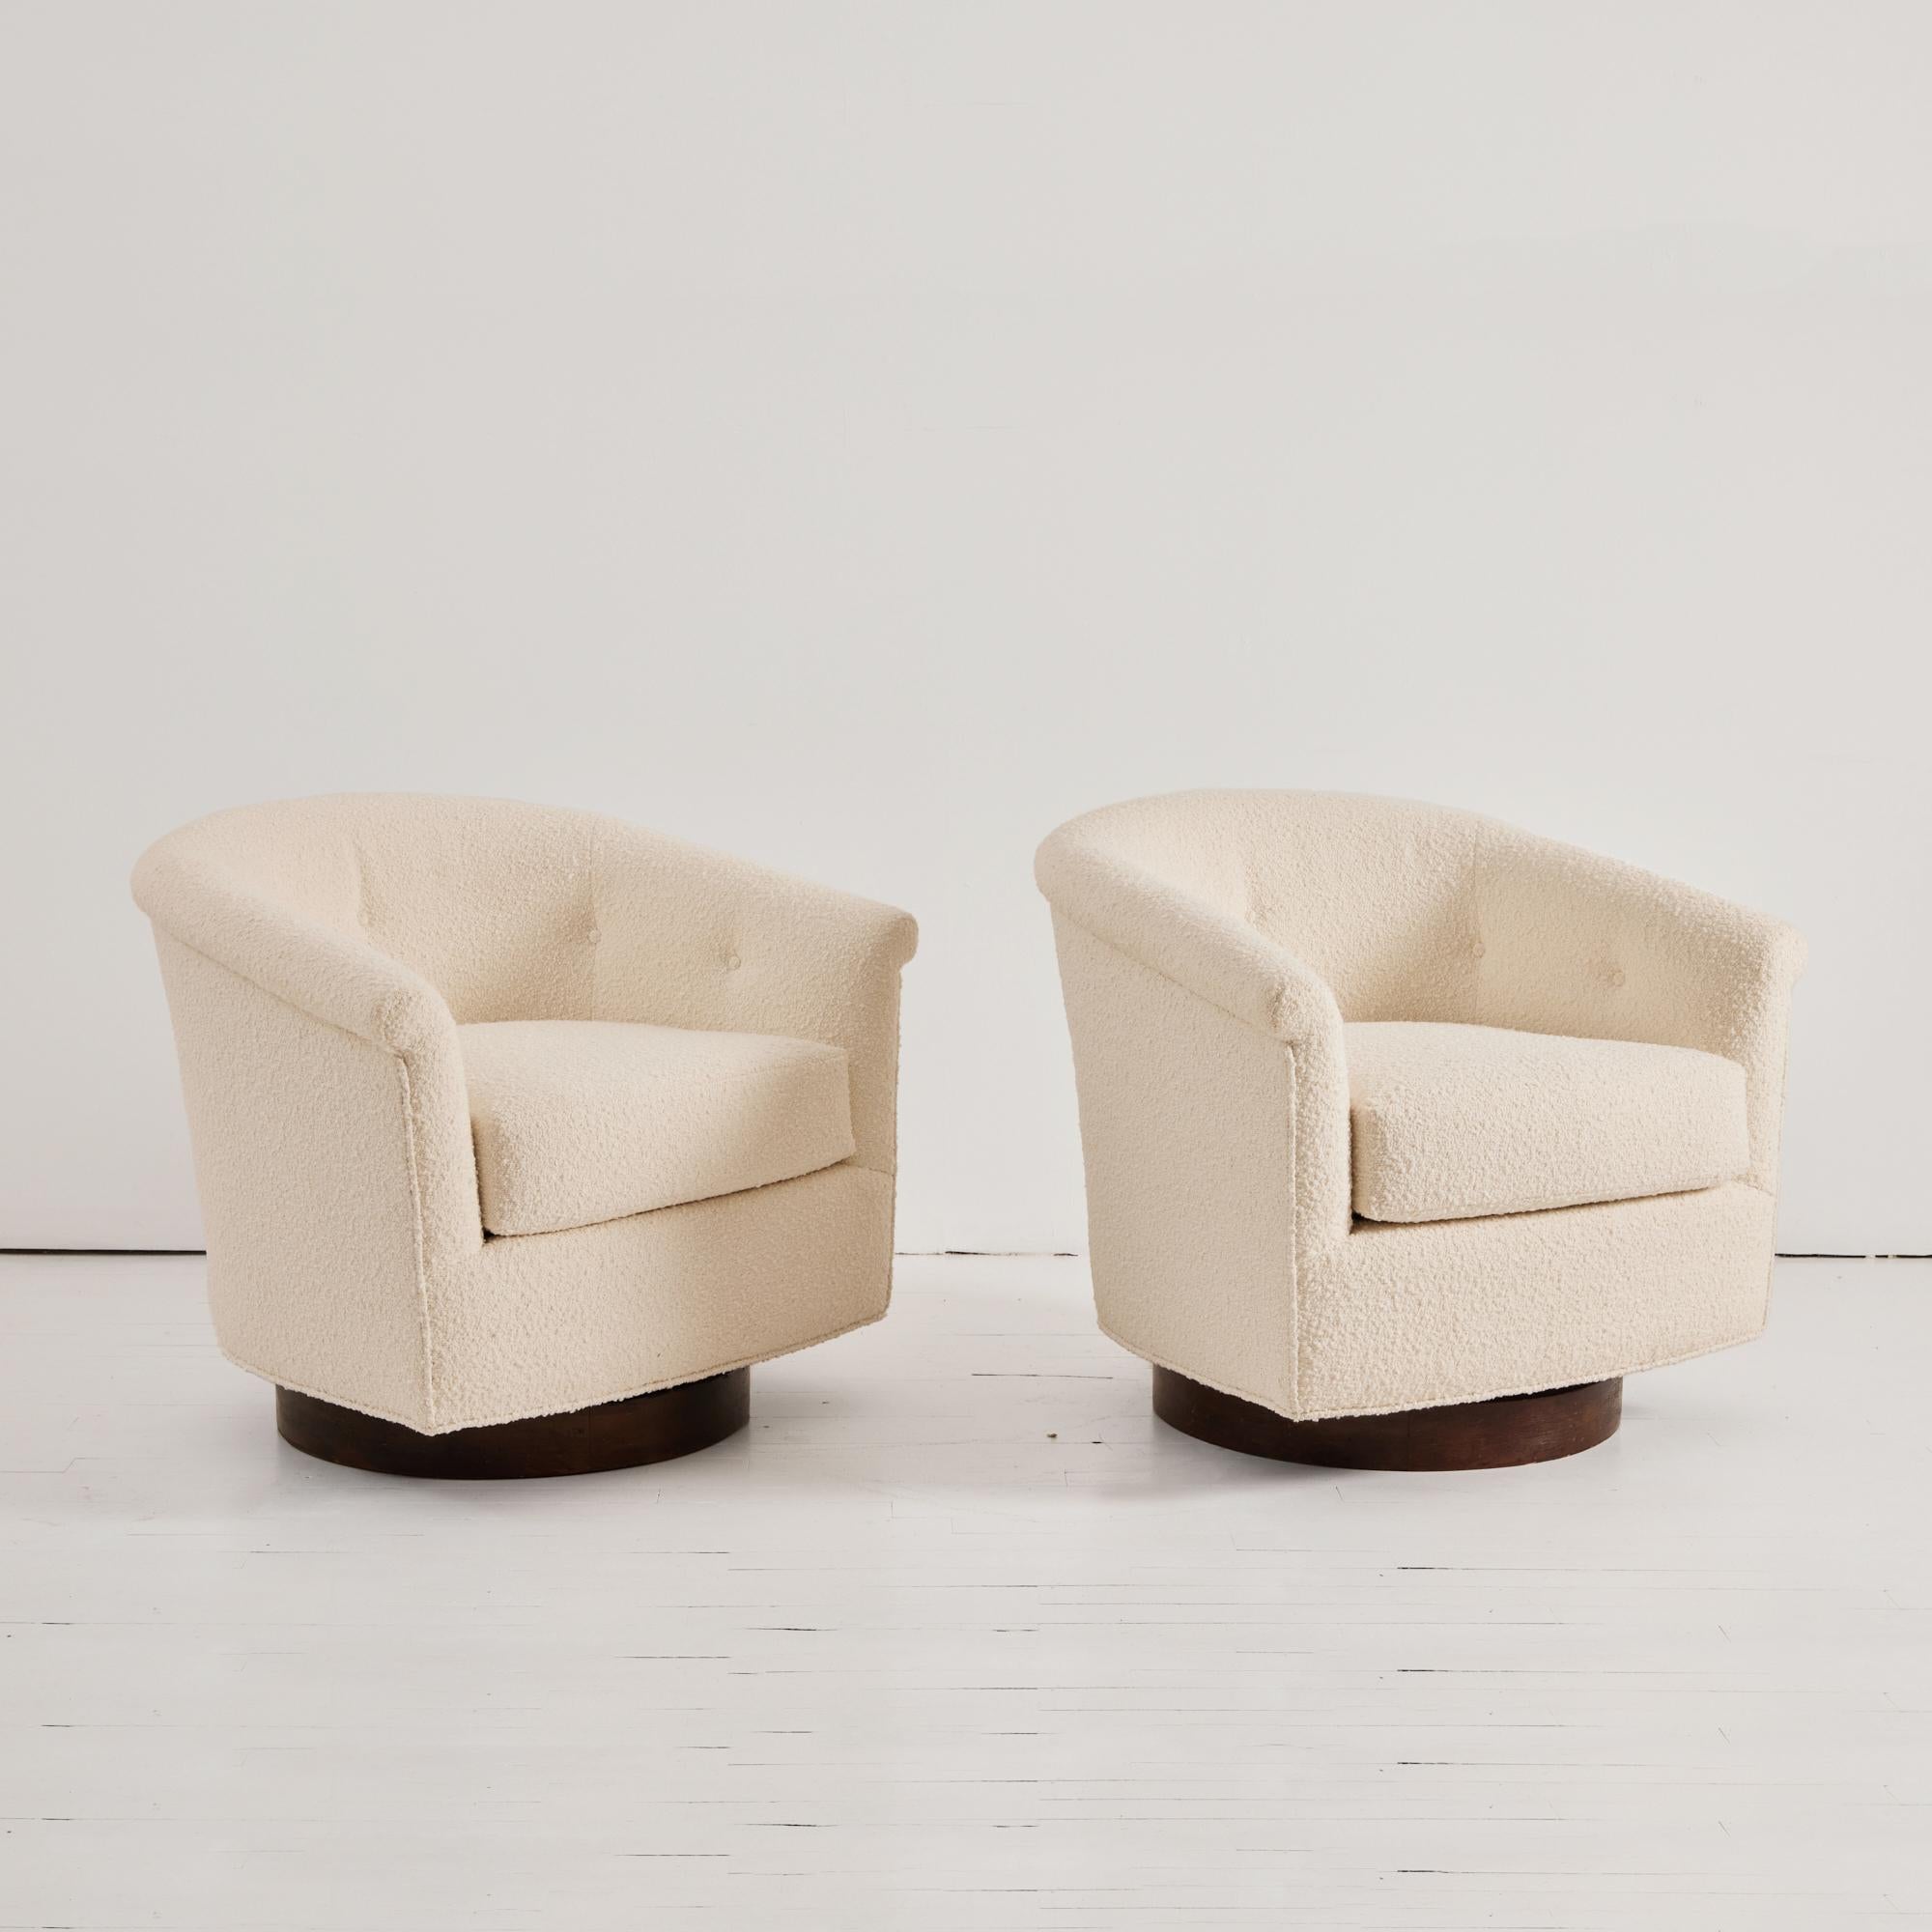 These classic swivel chairs are attributed to designer Milo Baughman. Fully reupholstered in an Ivory Boucle, tufted buttons at the back seat and wood swivel base. These chairs are timeless in their appeal